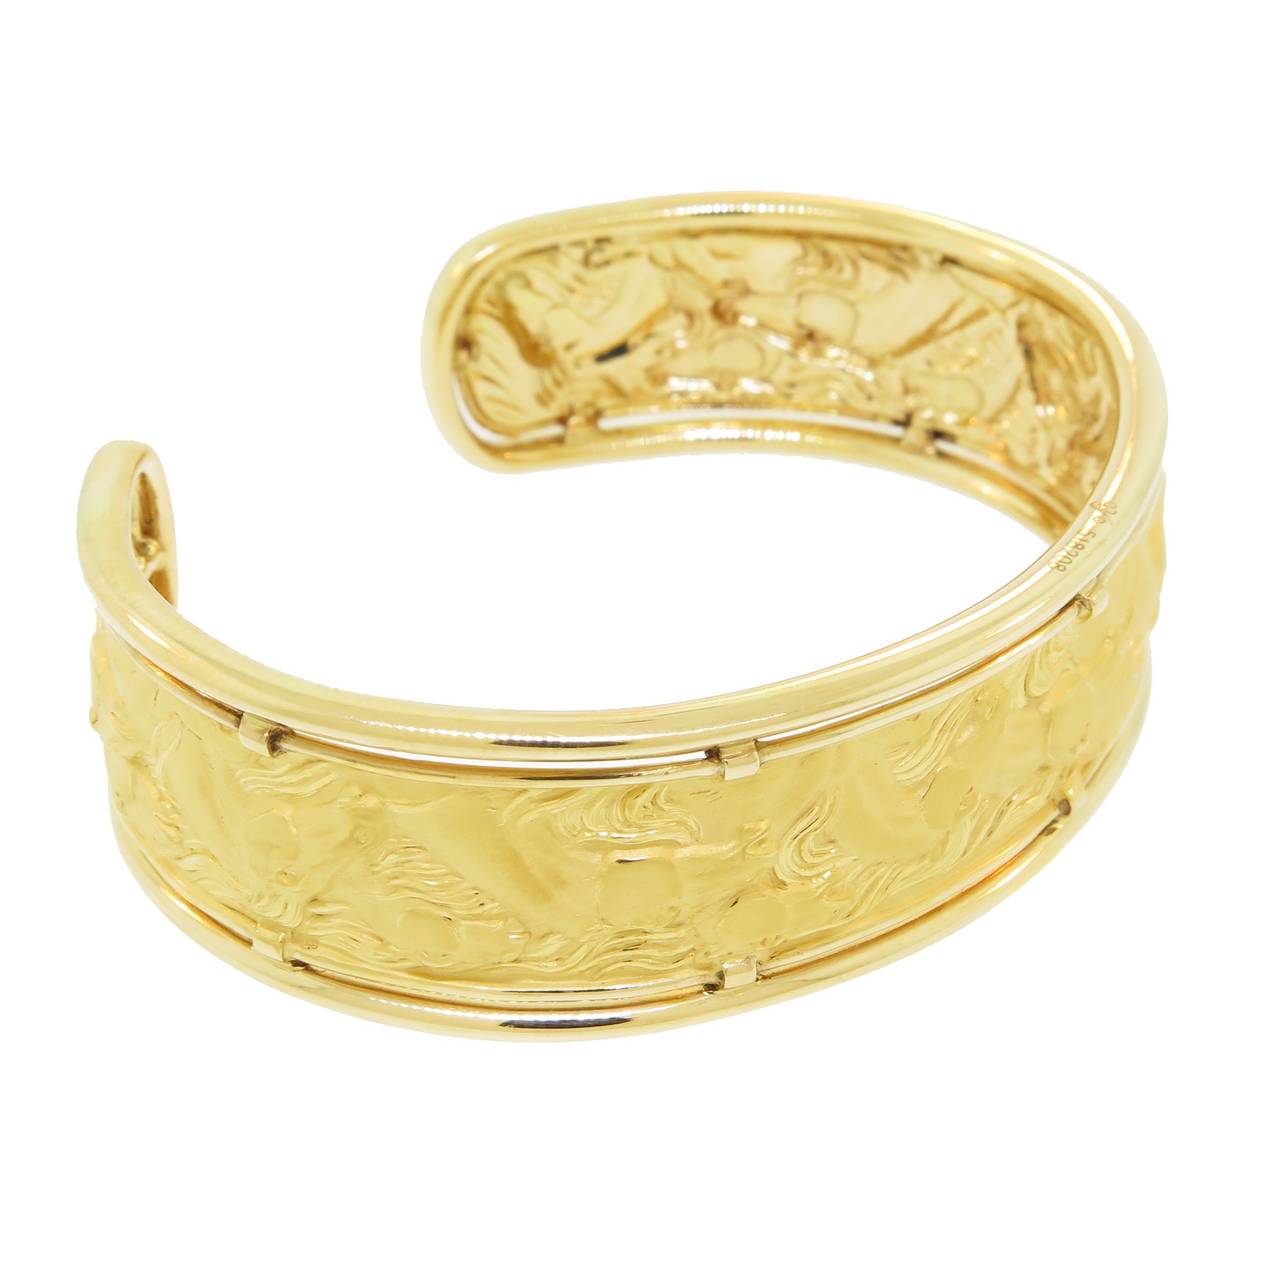 Stunning 18 karat yellow gold hand engraved horse cuff bracelet.  Carrera y Carrera's signature finish of their gold gives this bracelet a unique look!